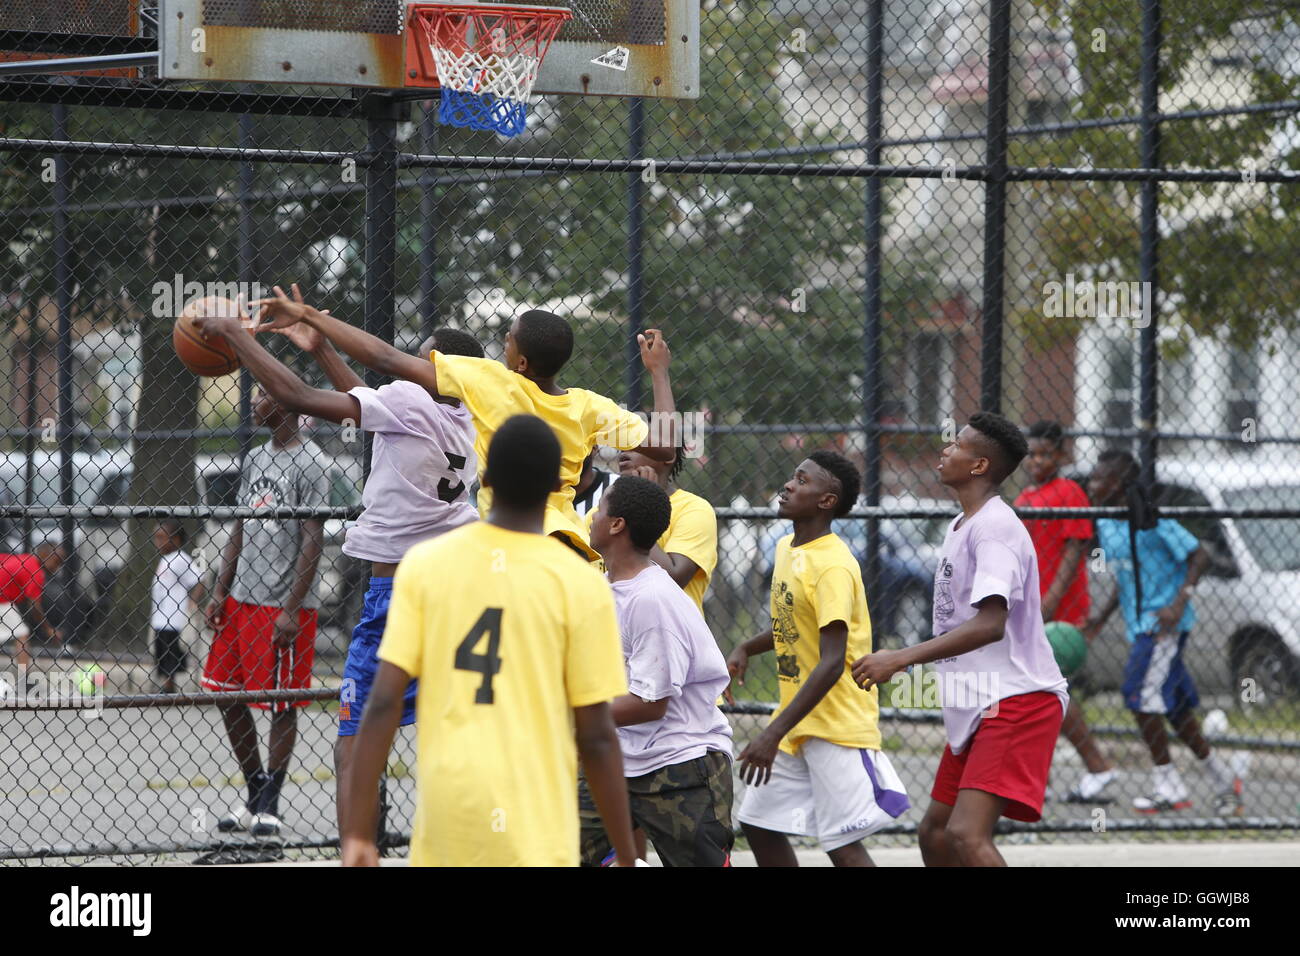 New York City, United States. 06th Aug, 2016. E4F, Equality for Flatbush staged its annual Hoops For Justice, an annual basketball tournament held in East Flatbush to honor the memories of Shantel Davis & Kimani Gray, two young people alleged to have been victims of lethal force by the NYPD. © Andy Katz/Pacific Press/Alamy Live News Stock Photo